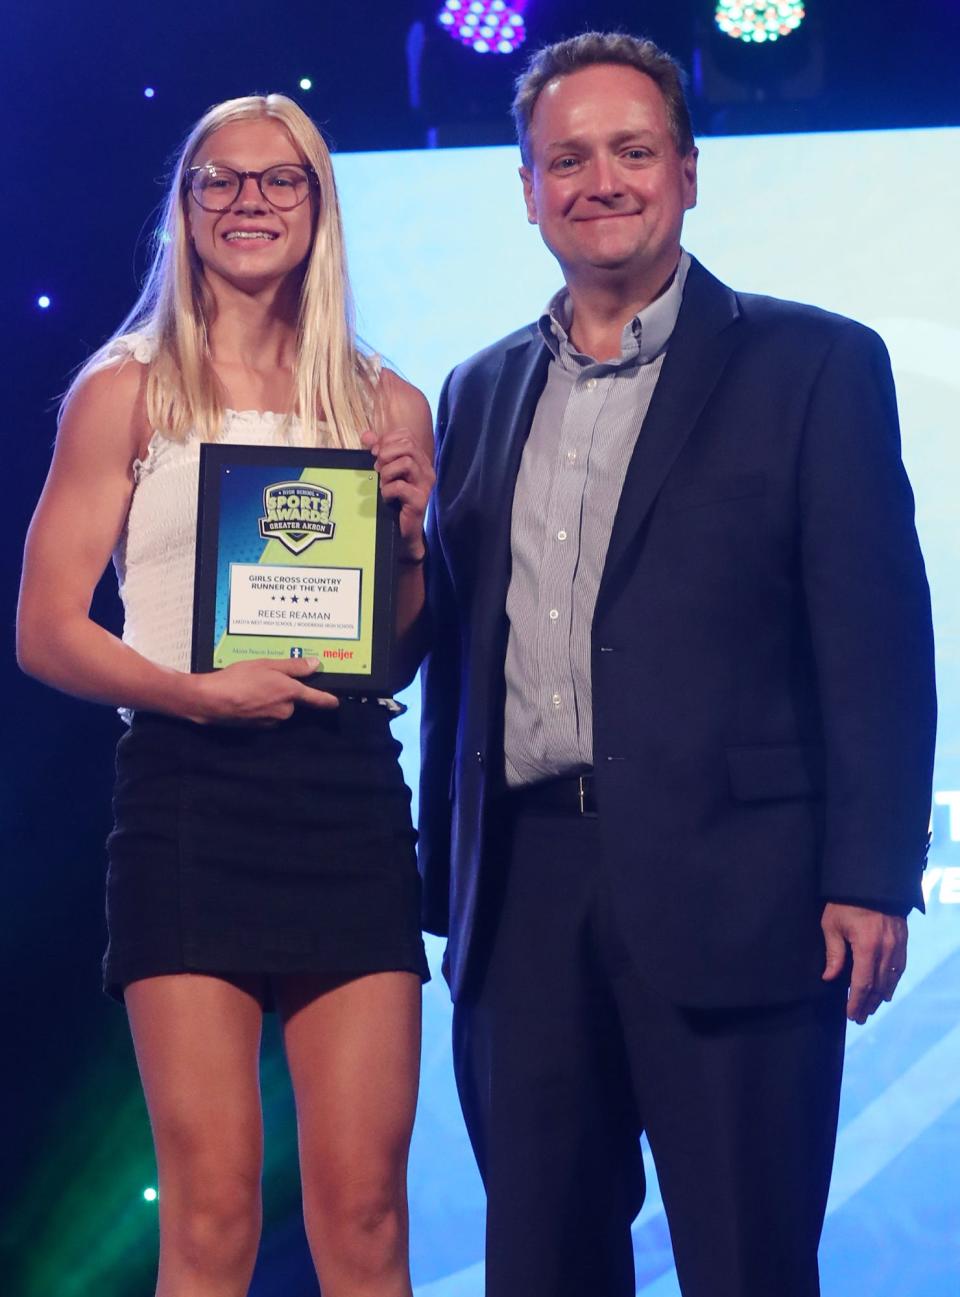 Woodridge High's Reese Reaman Greater Akron Girls Cross Country Player of the Year with Michael Shearer Akron Beacon Journal editor at the High School Sports All-Star Awards at the Civic Theatre in Akron on Friday.